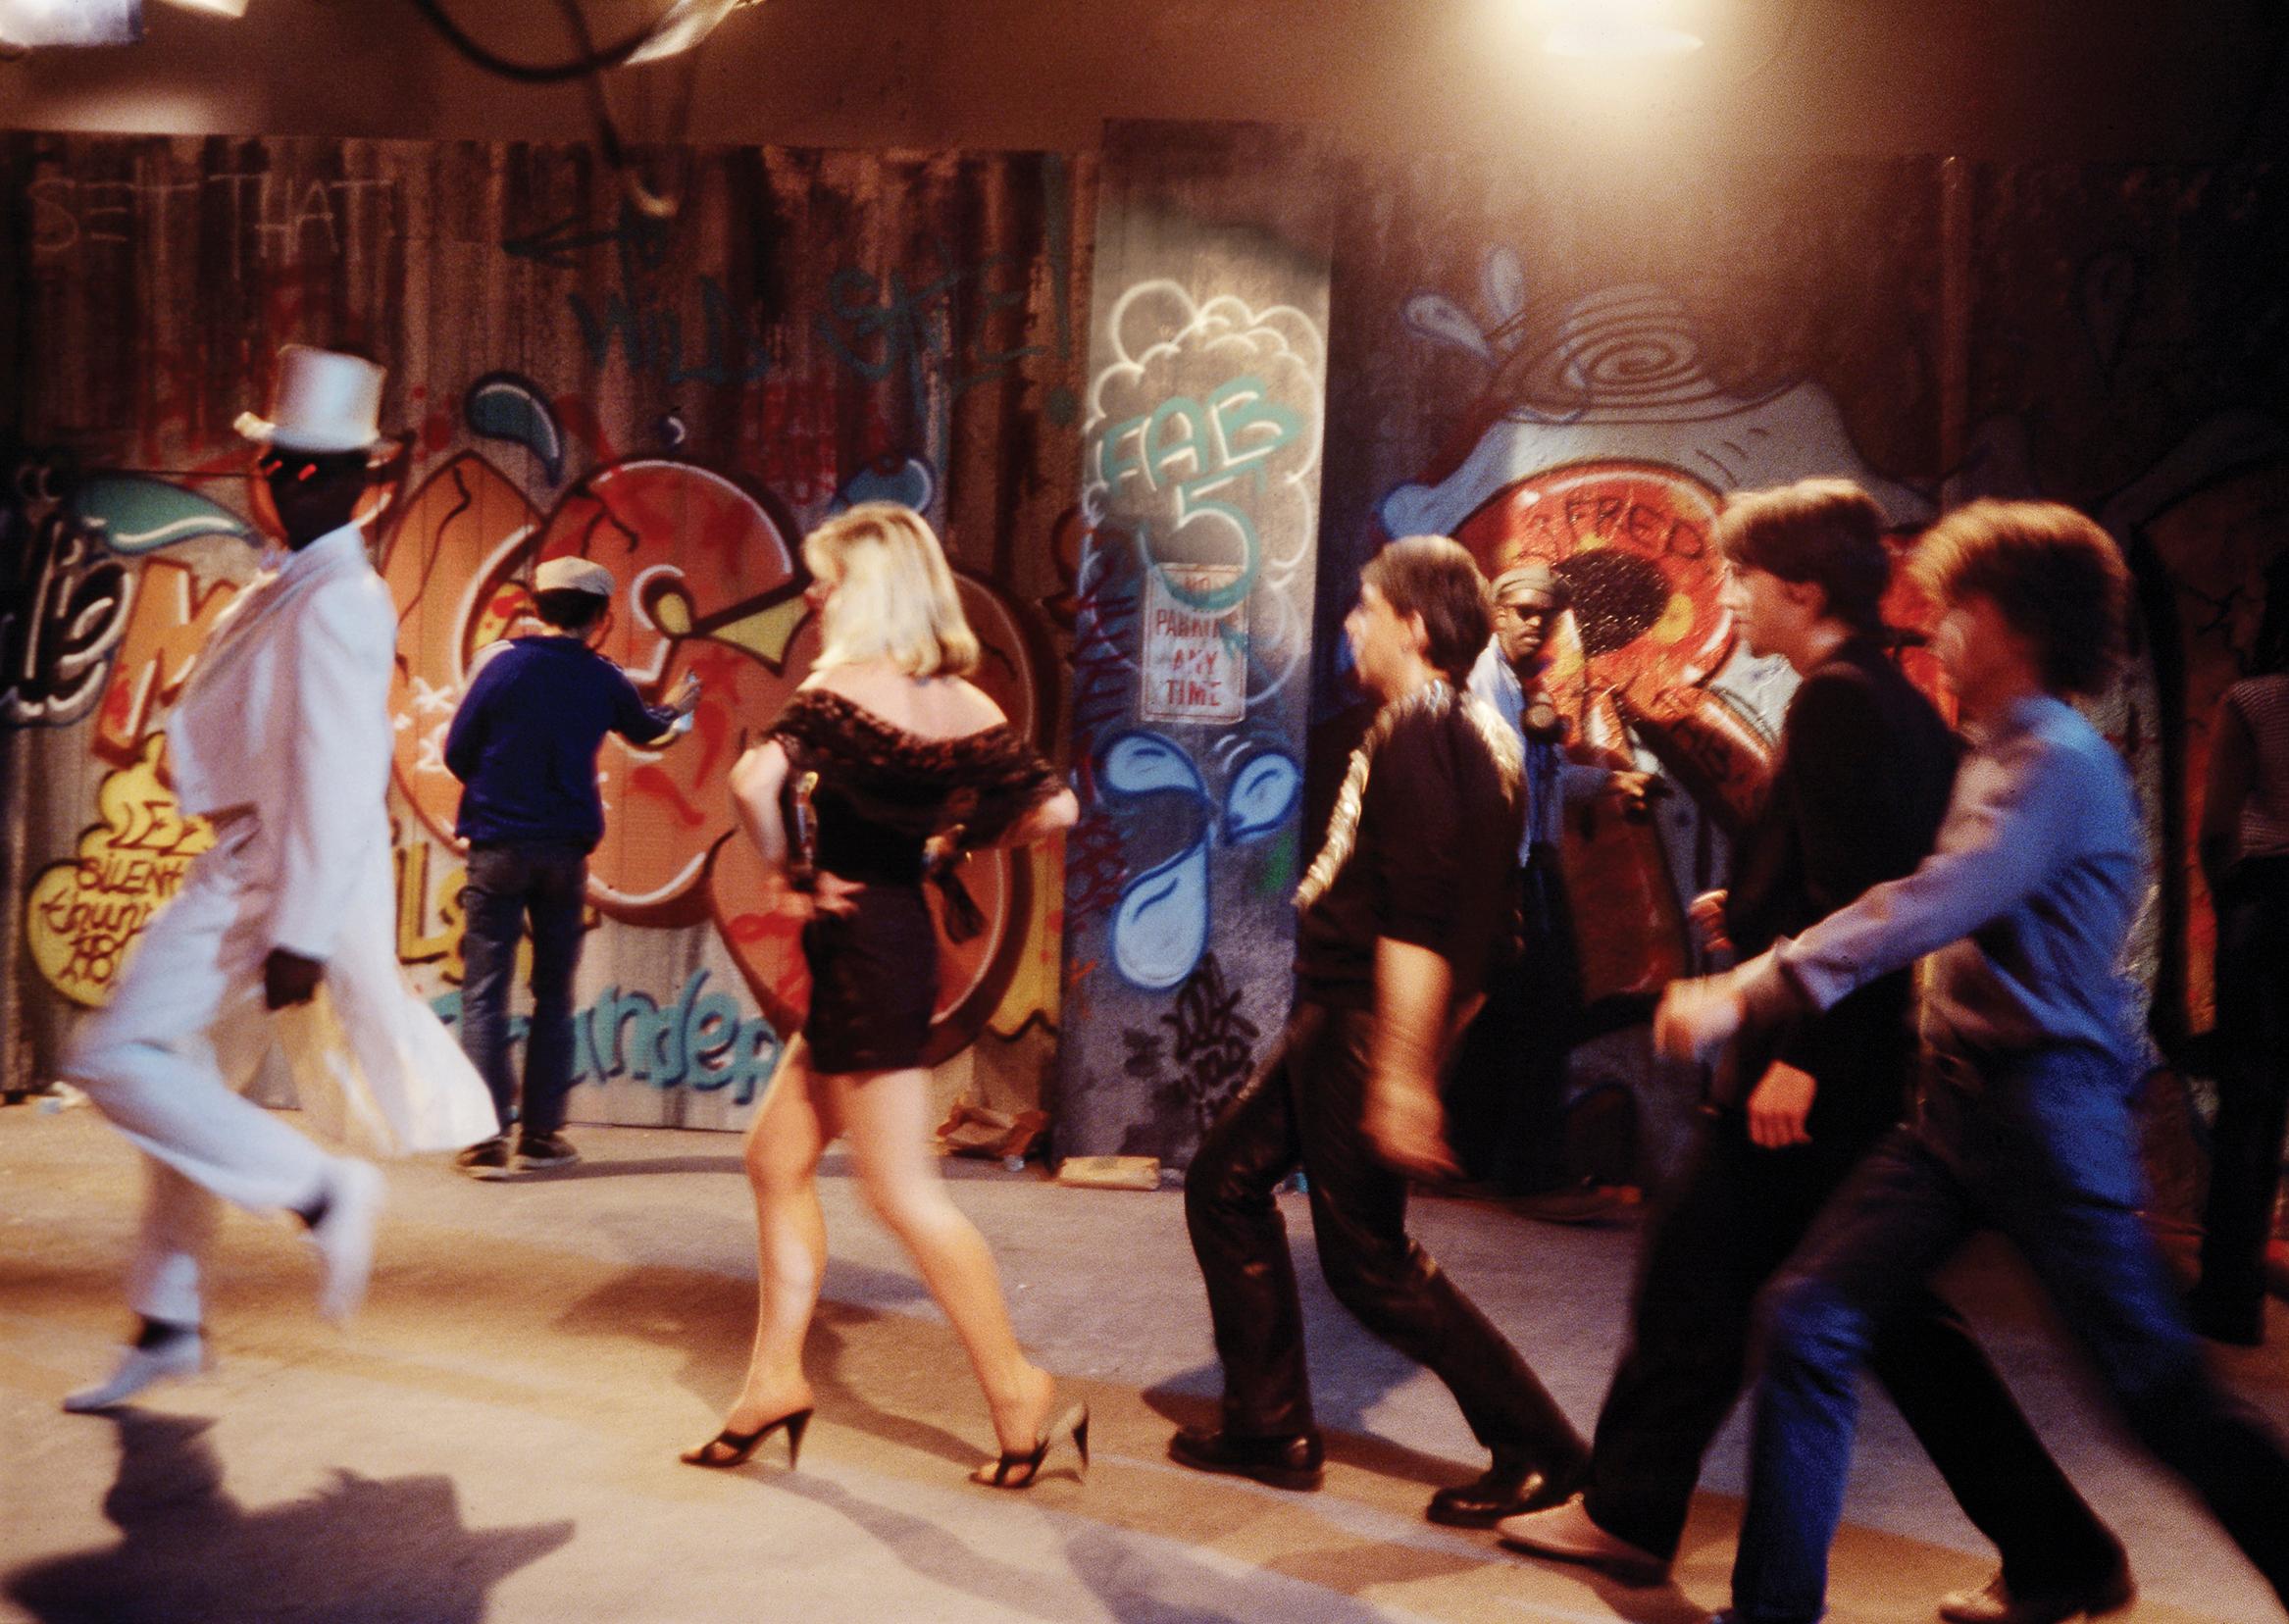 Charlie Ahearn, "Rapture" (in motion) 1981:
A rare historic Debbie Harry, Fab 5 Freddy & Lee Quinones photograph captured by Wild Style director Charlie Ahearn on the set of Blondie's "Rapture".  

Medium: Archival Inkjet Print on heavy-weight